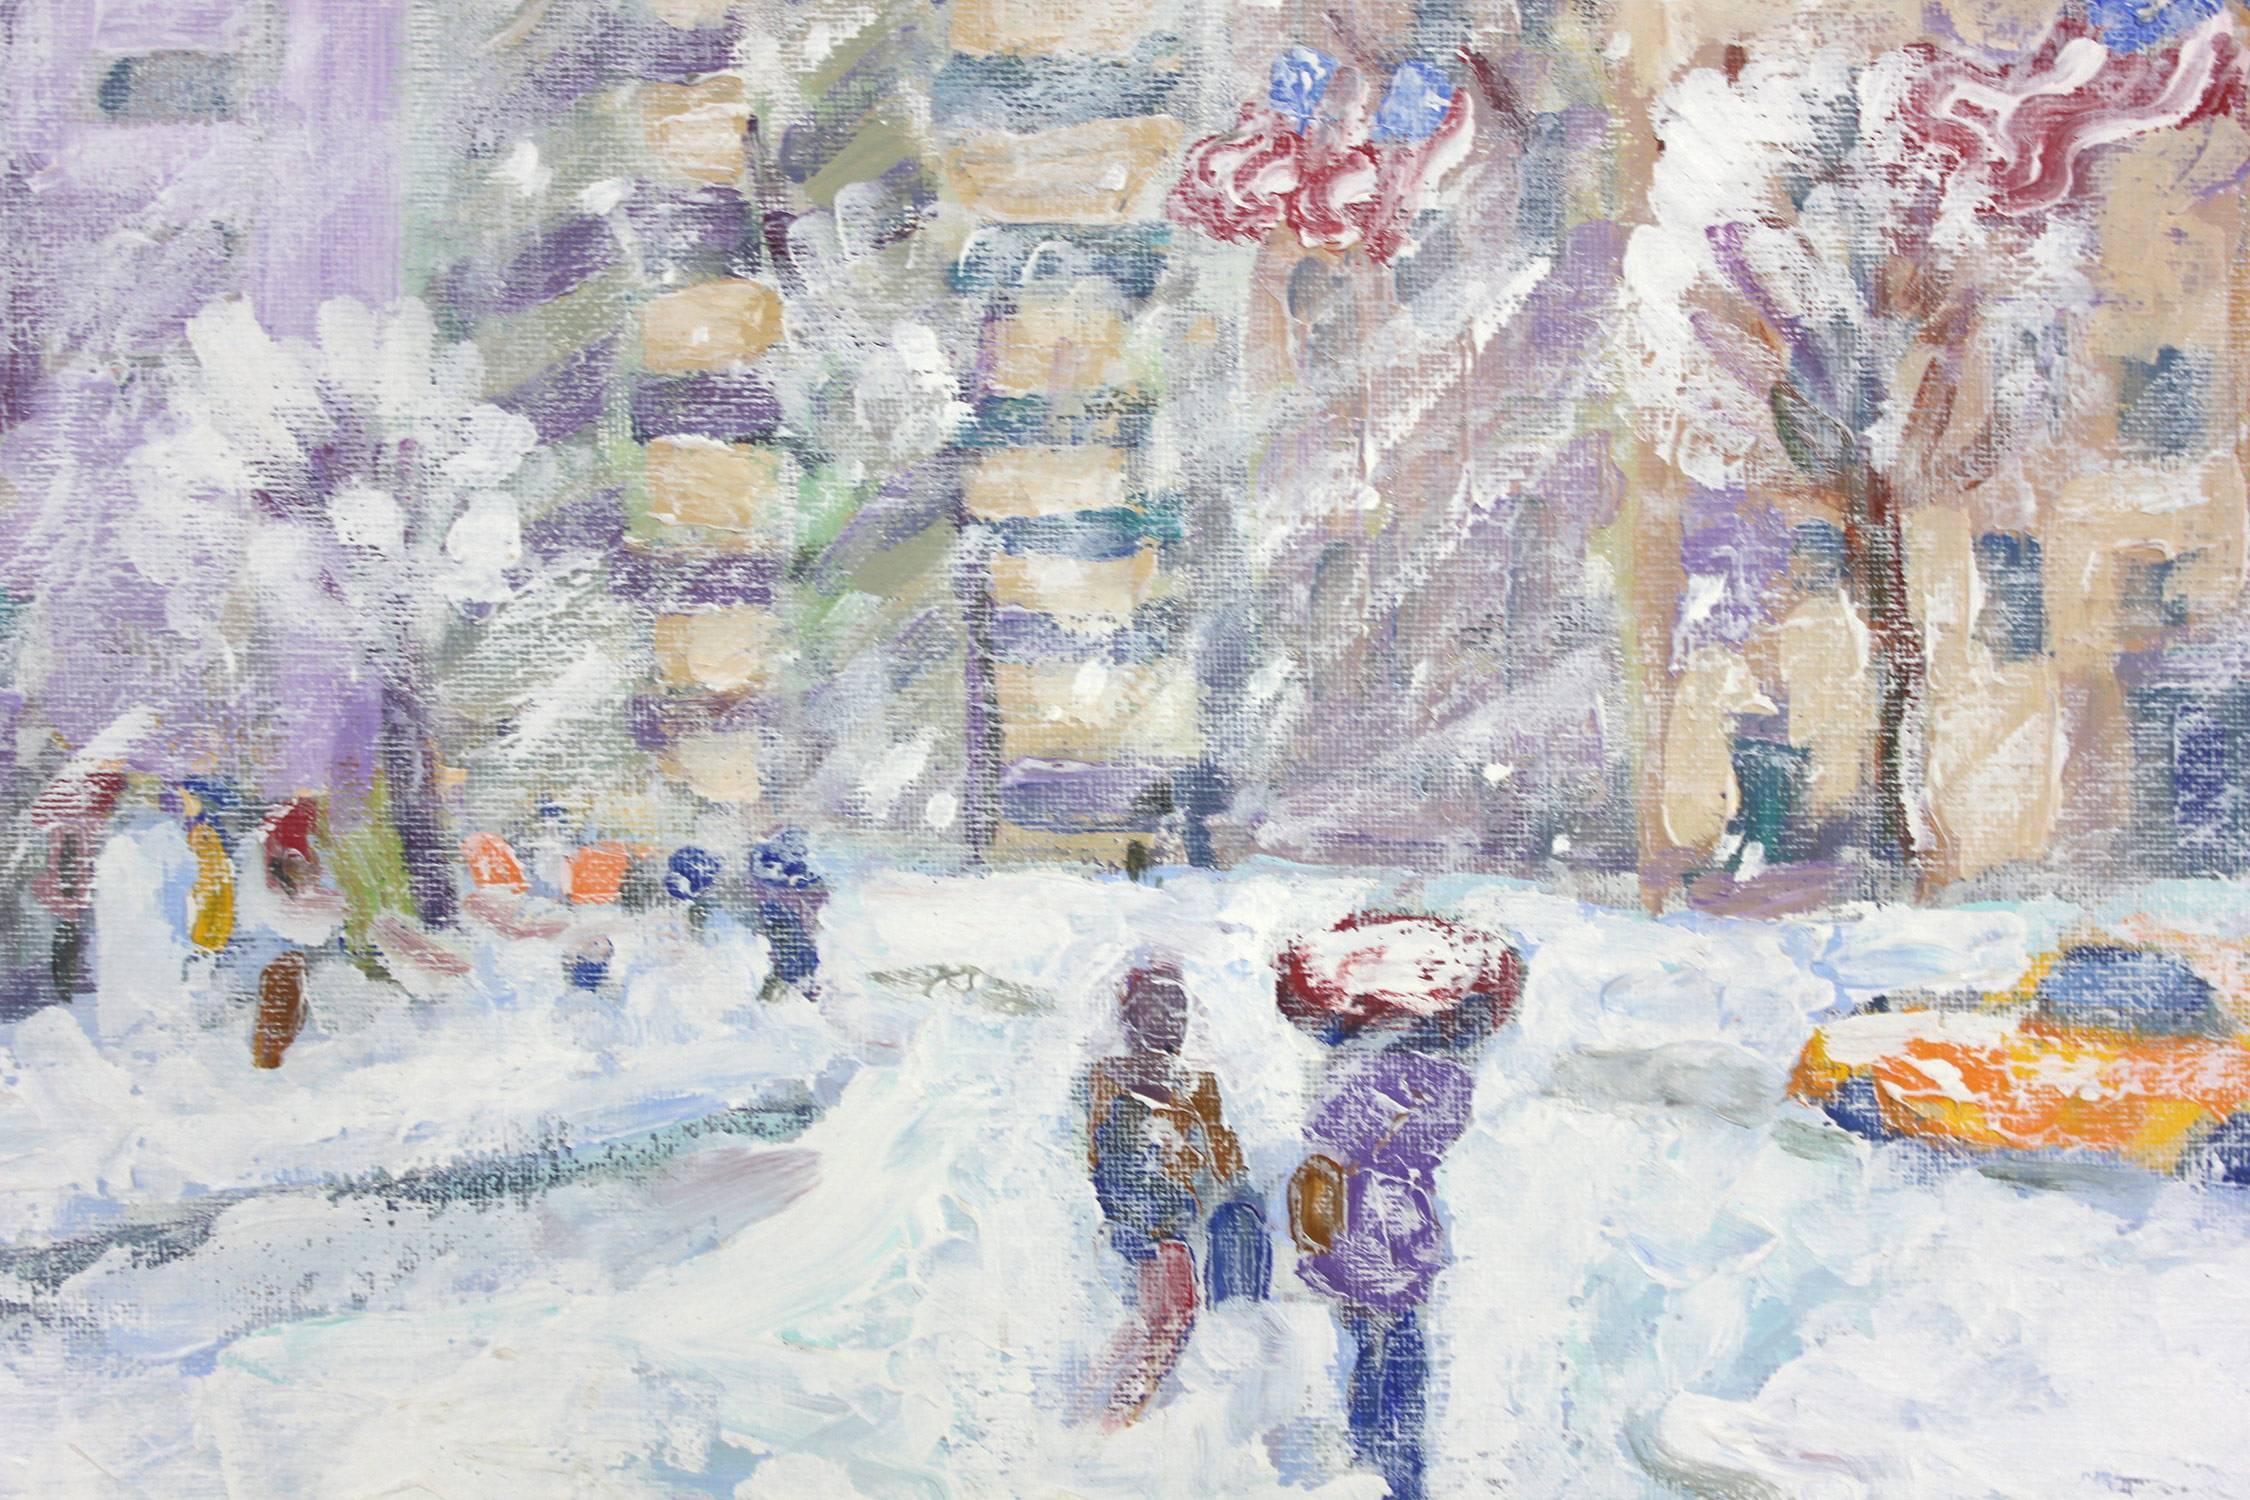 A scene of iconic Columbus Circle in Manhattan depicting the snowstorm in a most intimate, yet energetic way. Crimmins is known for capturing on sight scenes of Manhattan and Long Island, engaging his audience with quick use of brushwork and great